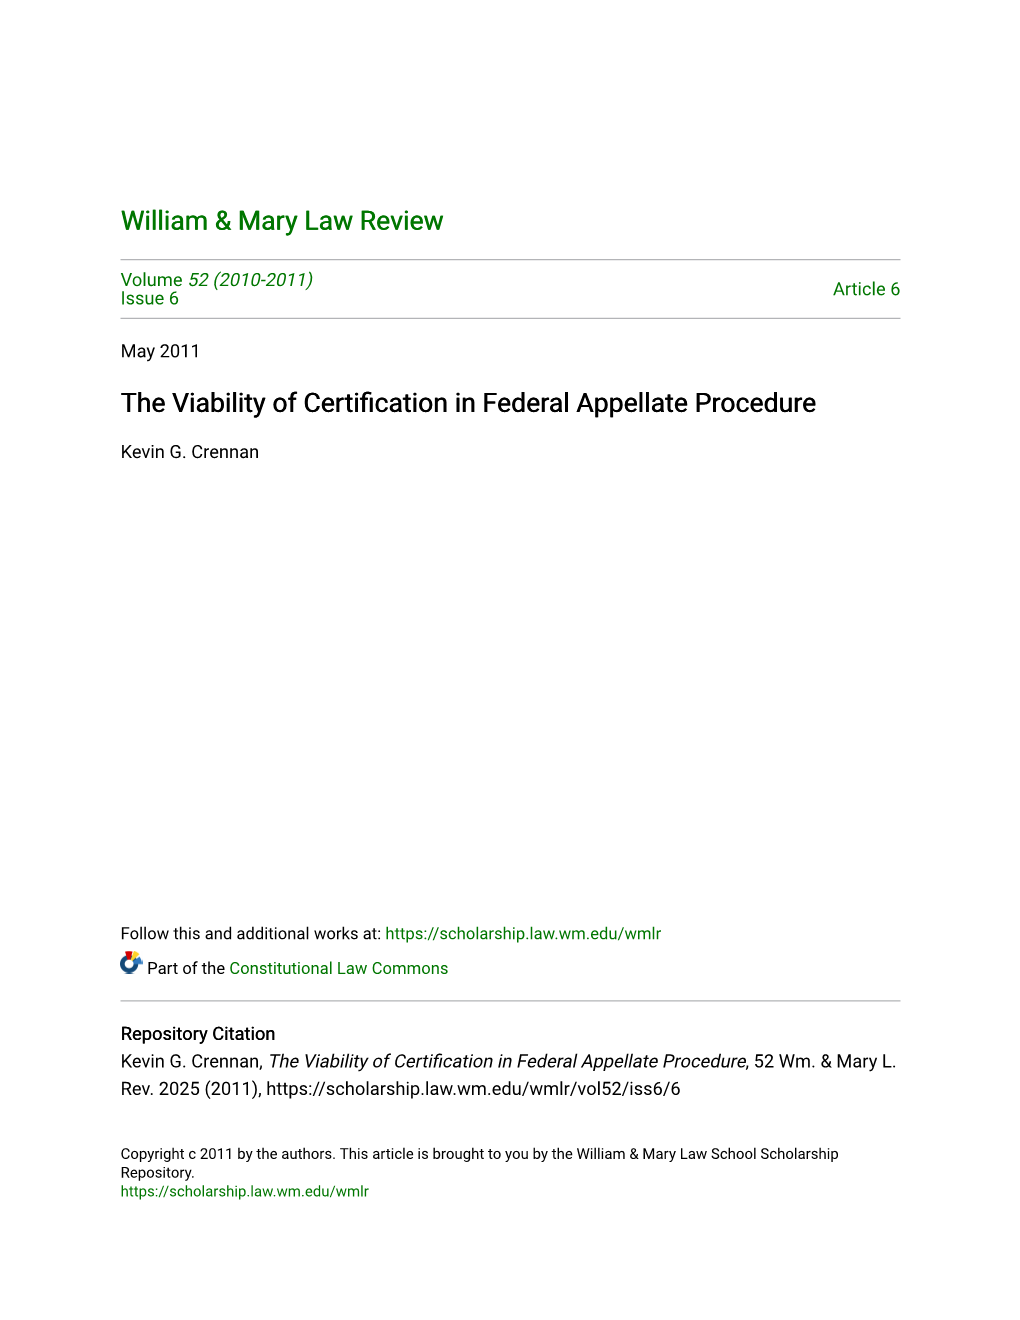 The Viability of Certification in Federal Appellate Procedure